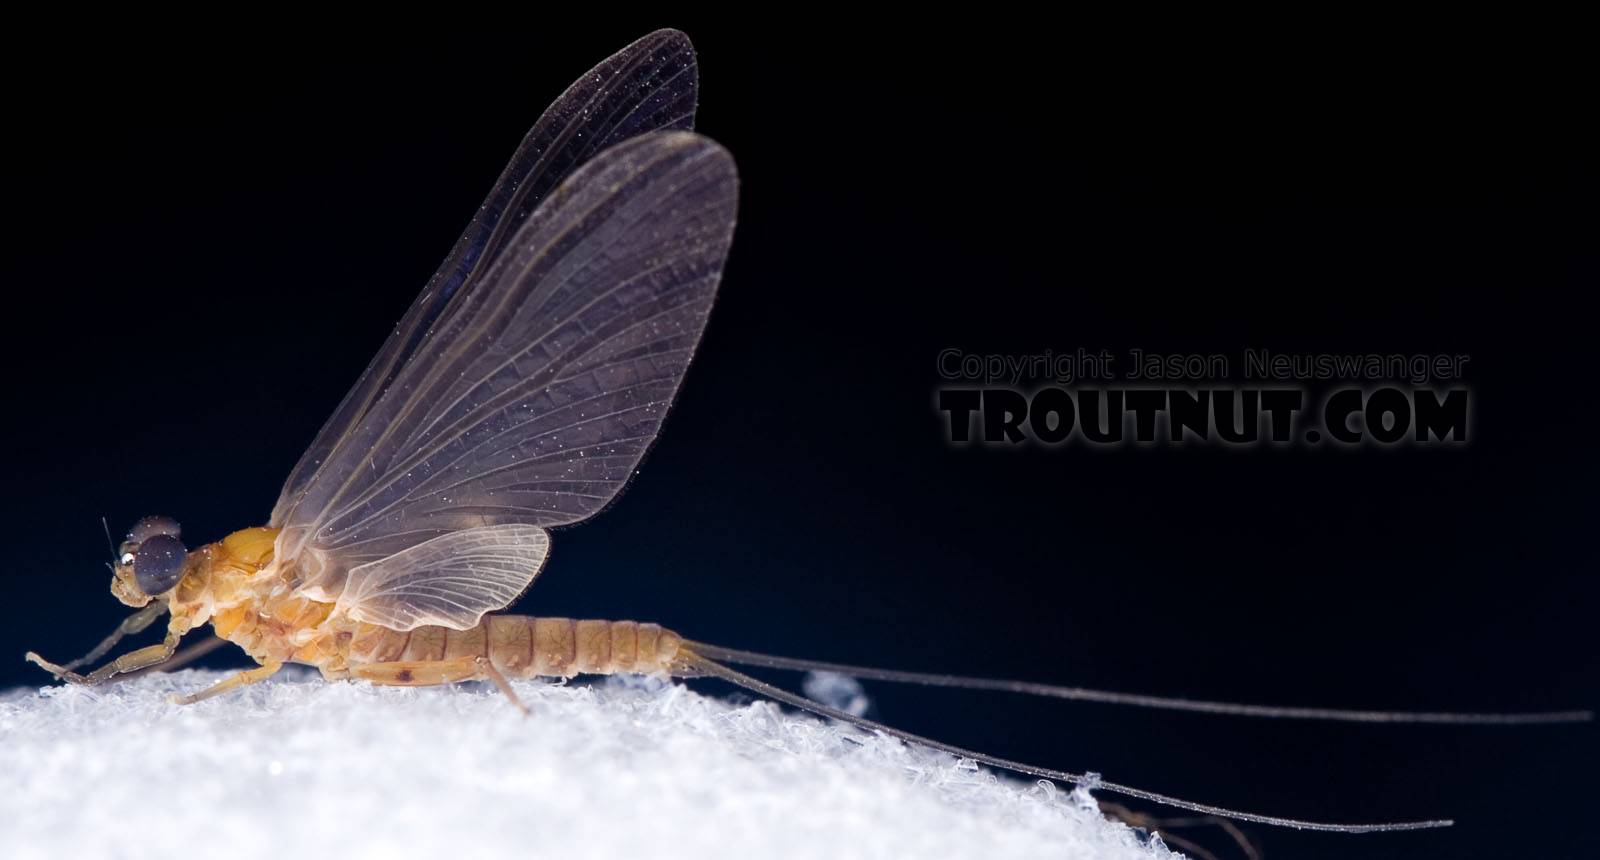 Male Epeorus (Little Maryatts) Mayfly Dun from the West Branch of the Delaware River in New York